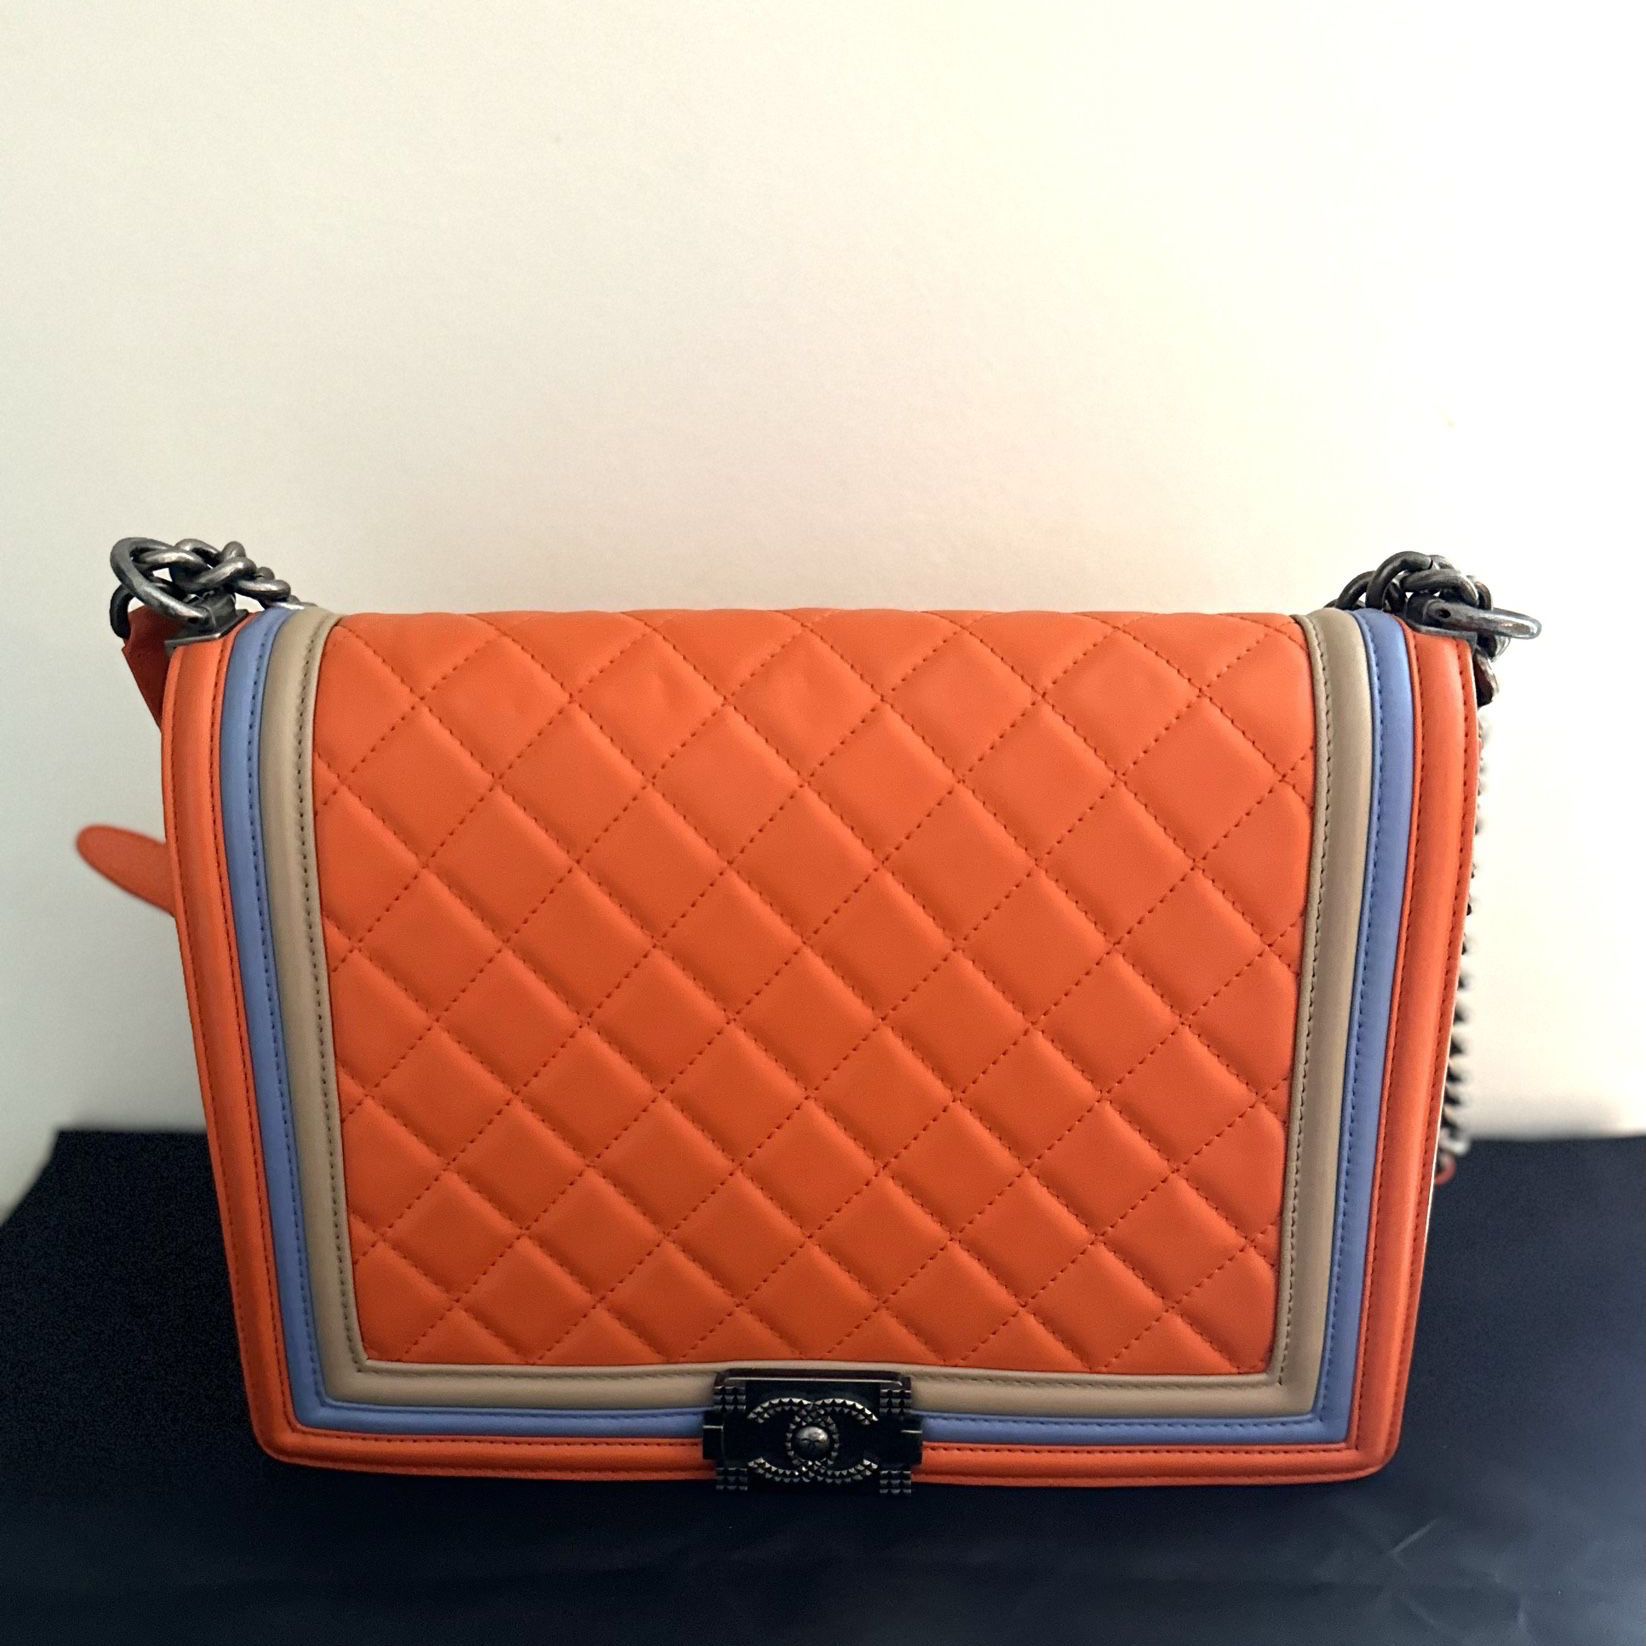 One of a Kind Vintage Black Chanel Purse for Sale in Thonotosassa, FL -  OfferUp